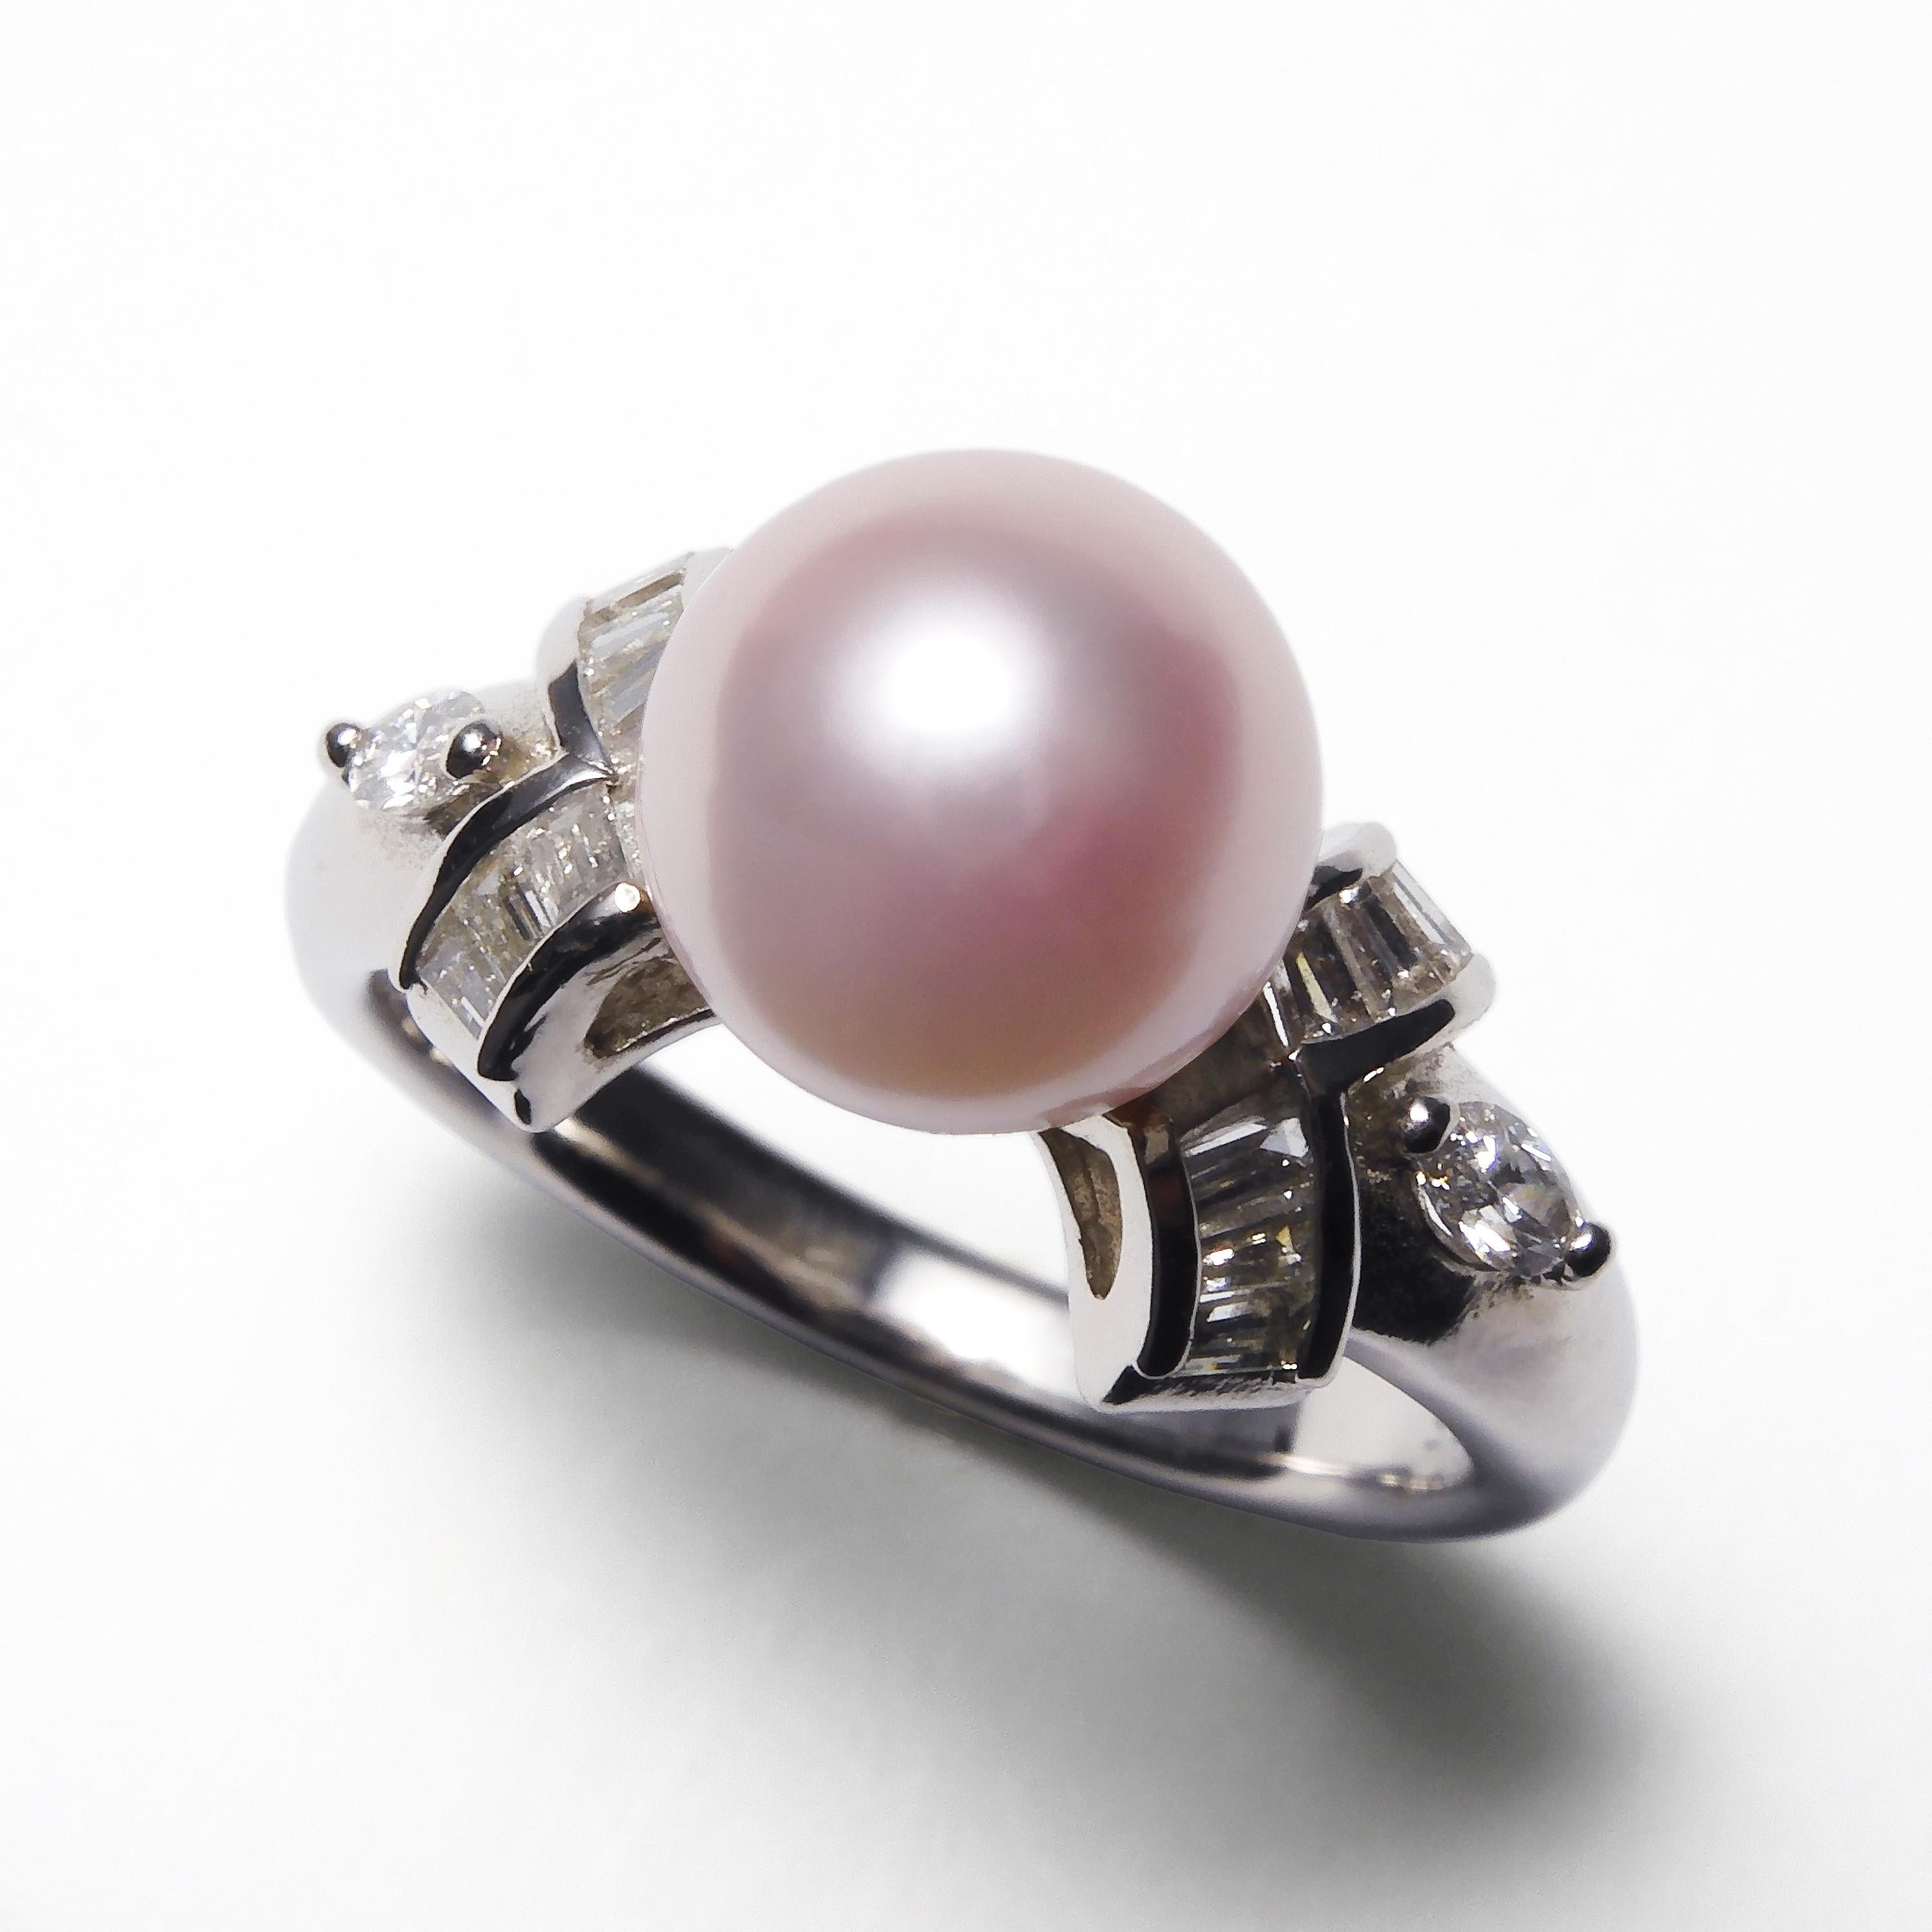 Our original coral core pearl were made in Japan. We named 